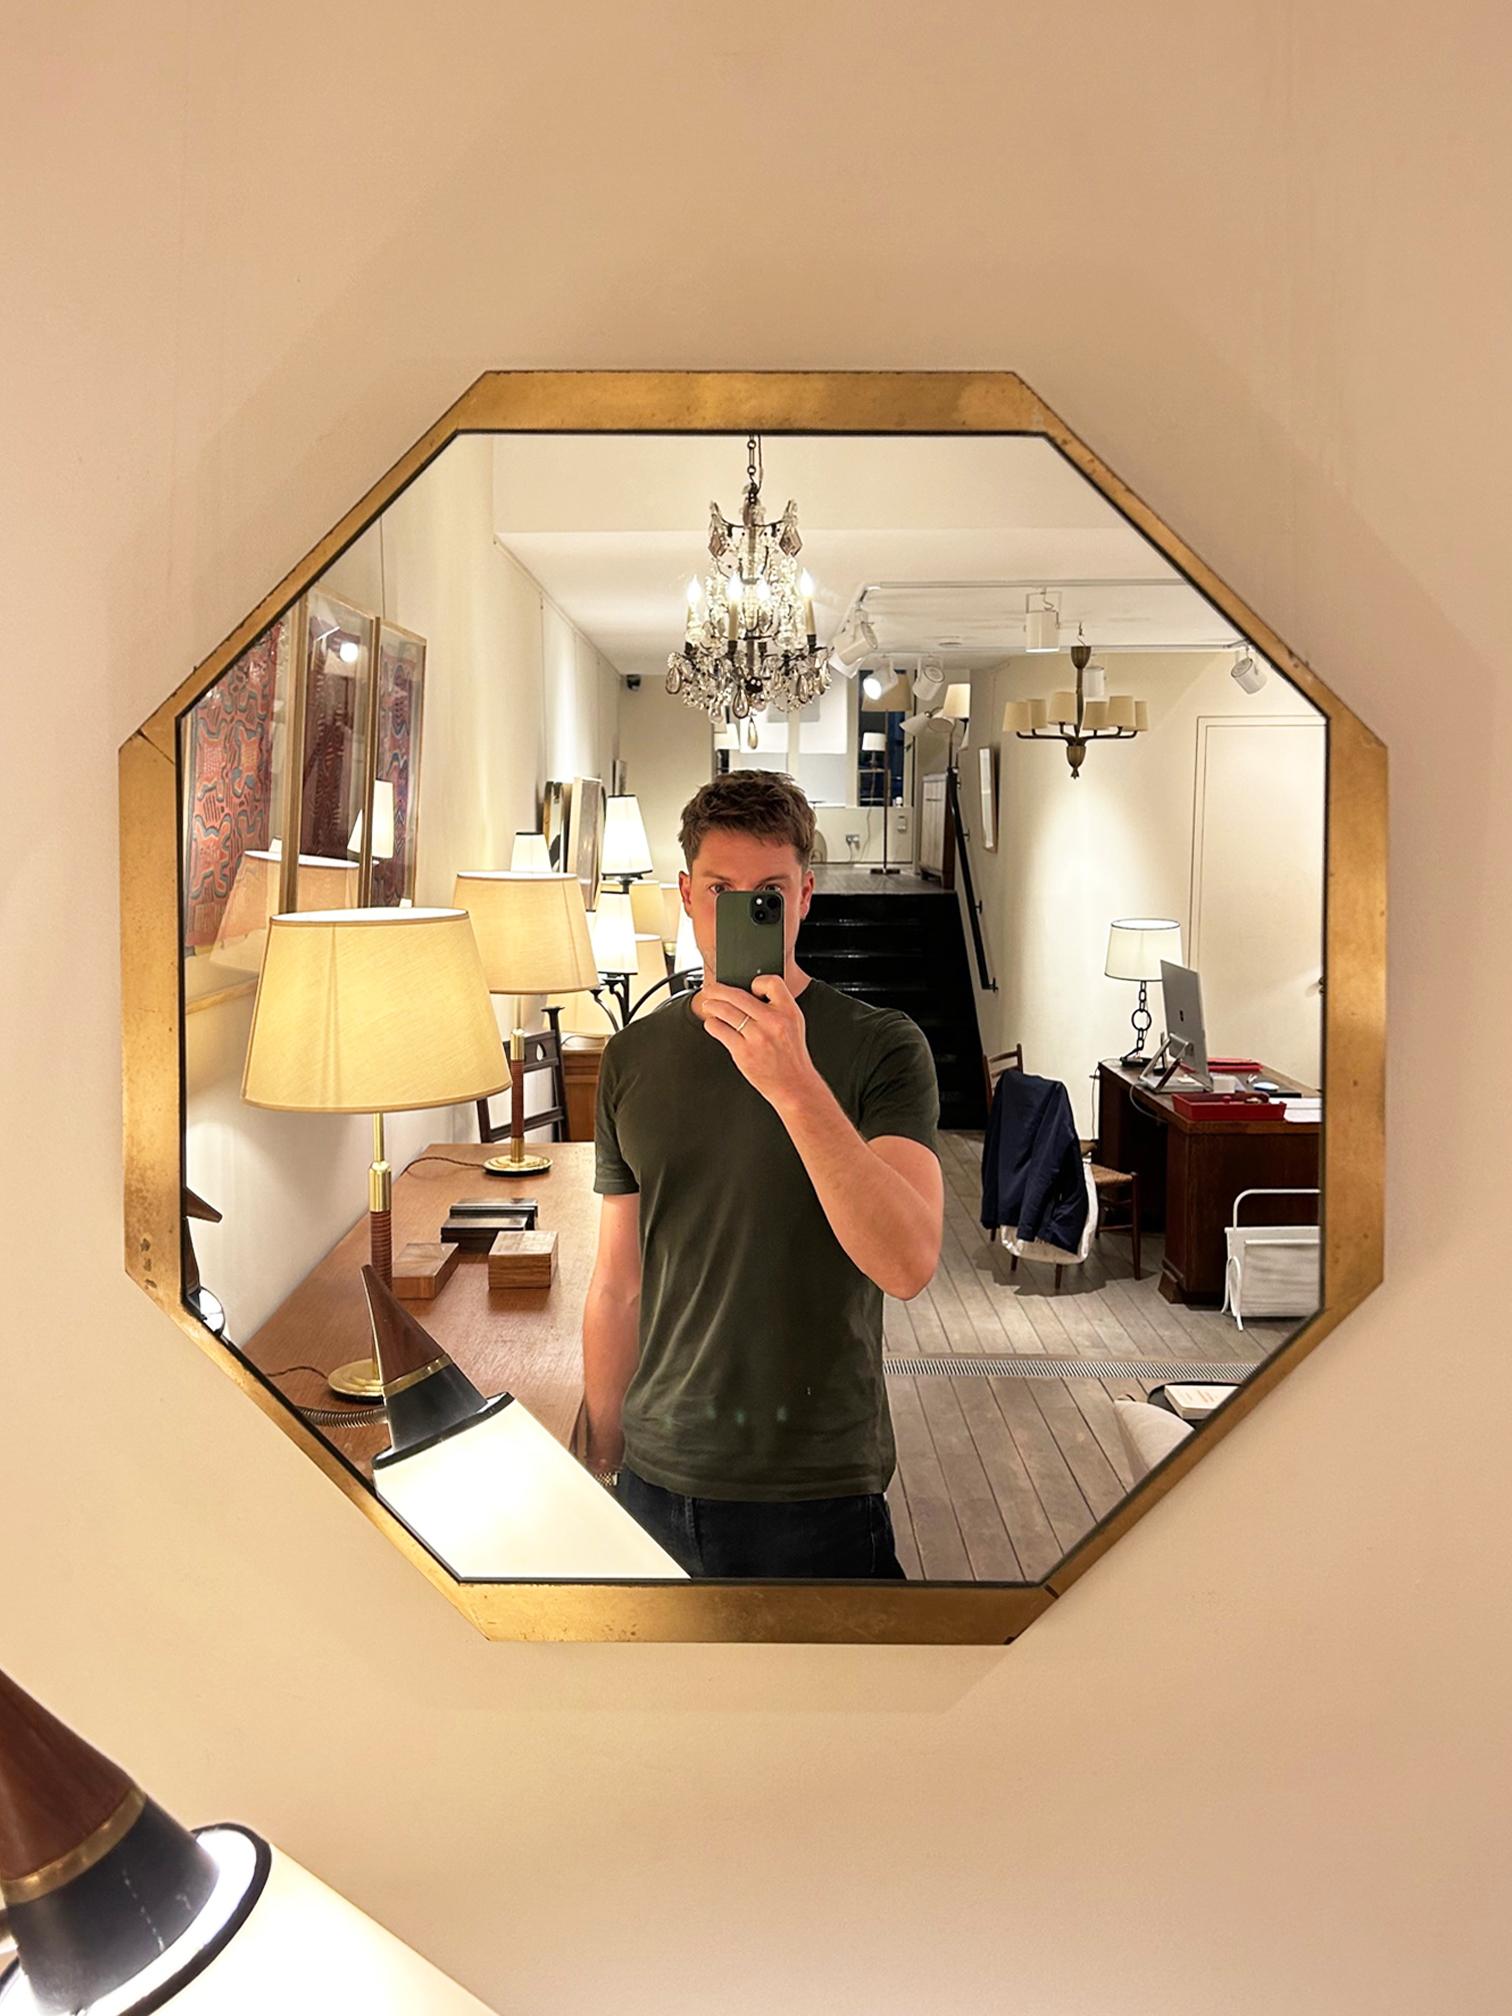 A brushed brass hexagonal mirror.
France, mid 20th Century
65.5 cm high by 65.5 cm wide by 2.5 cm depth